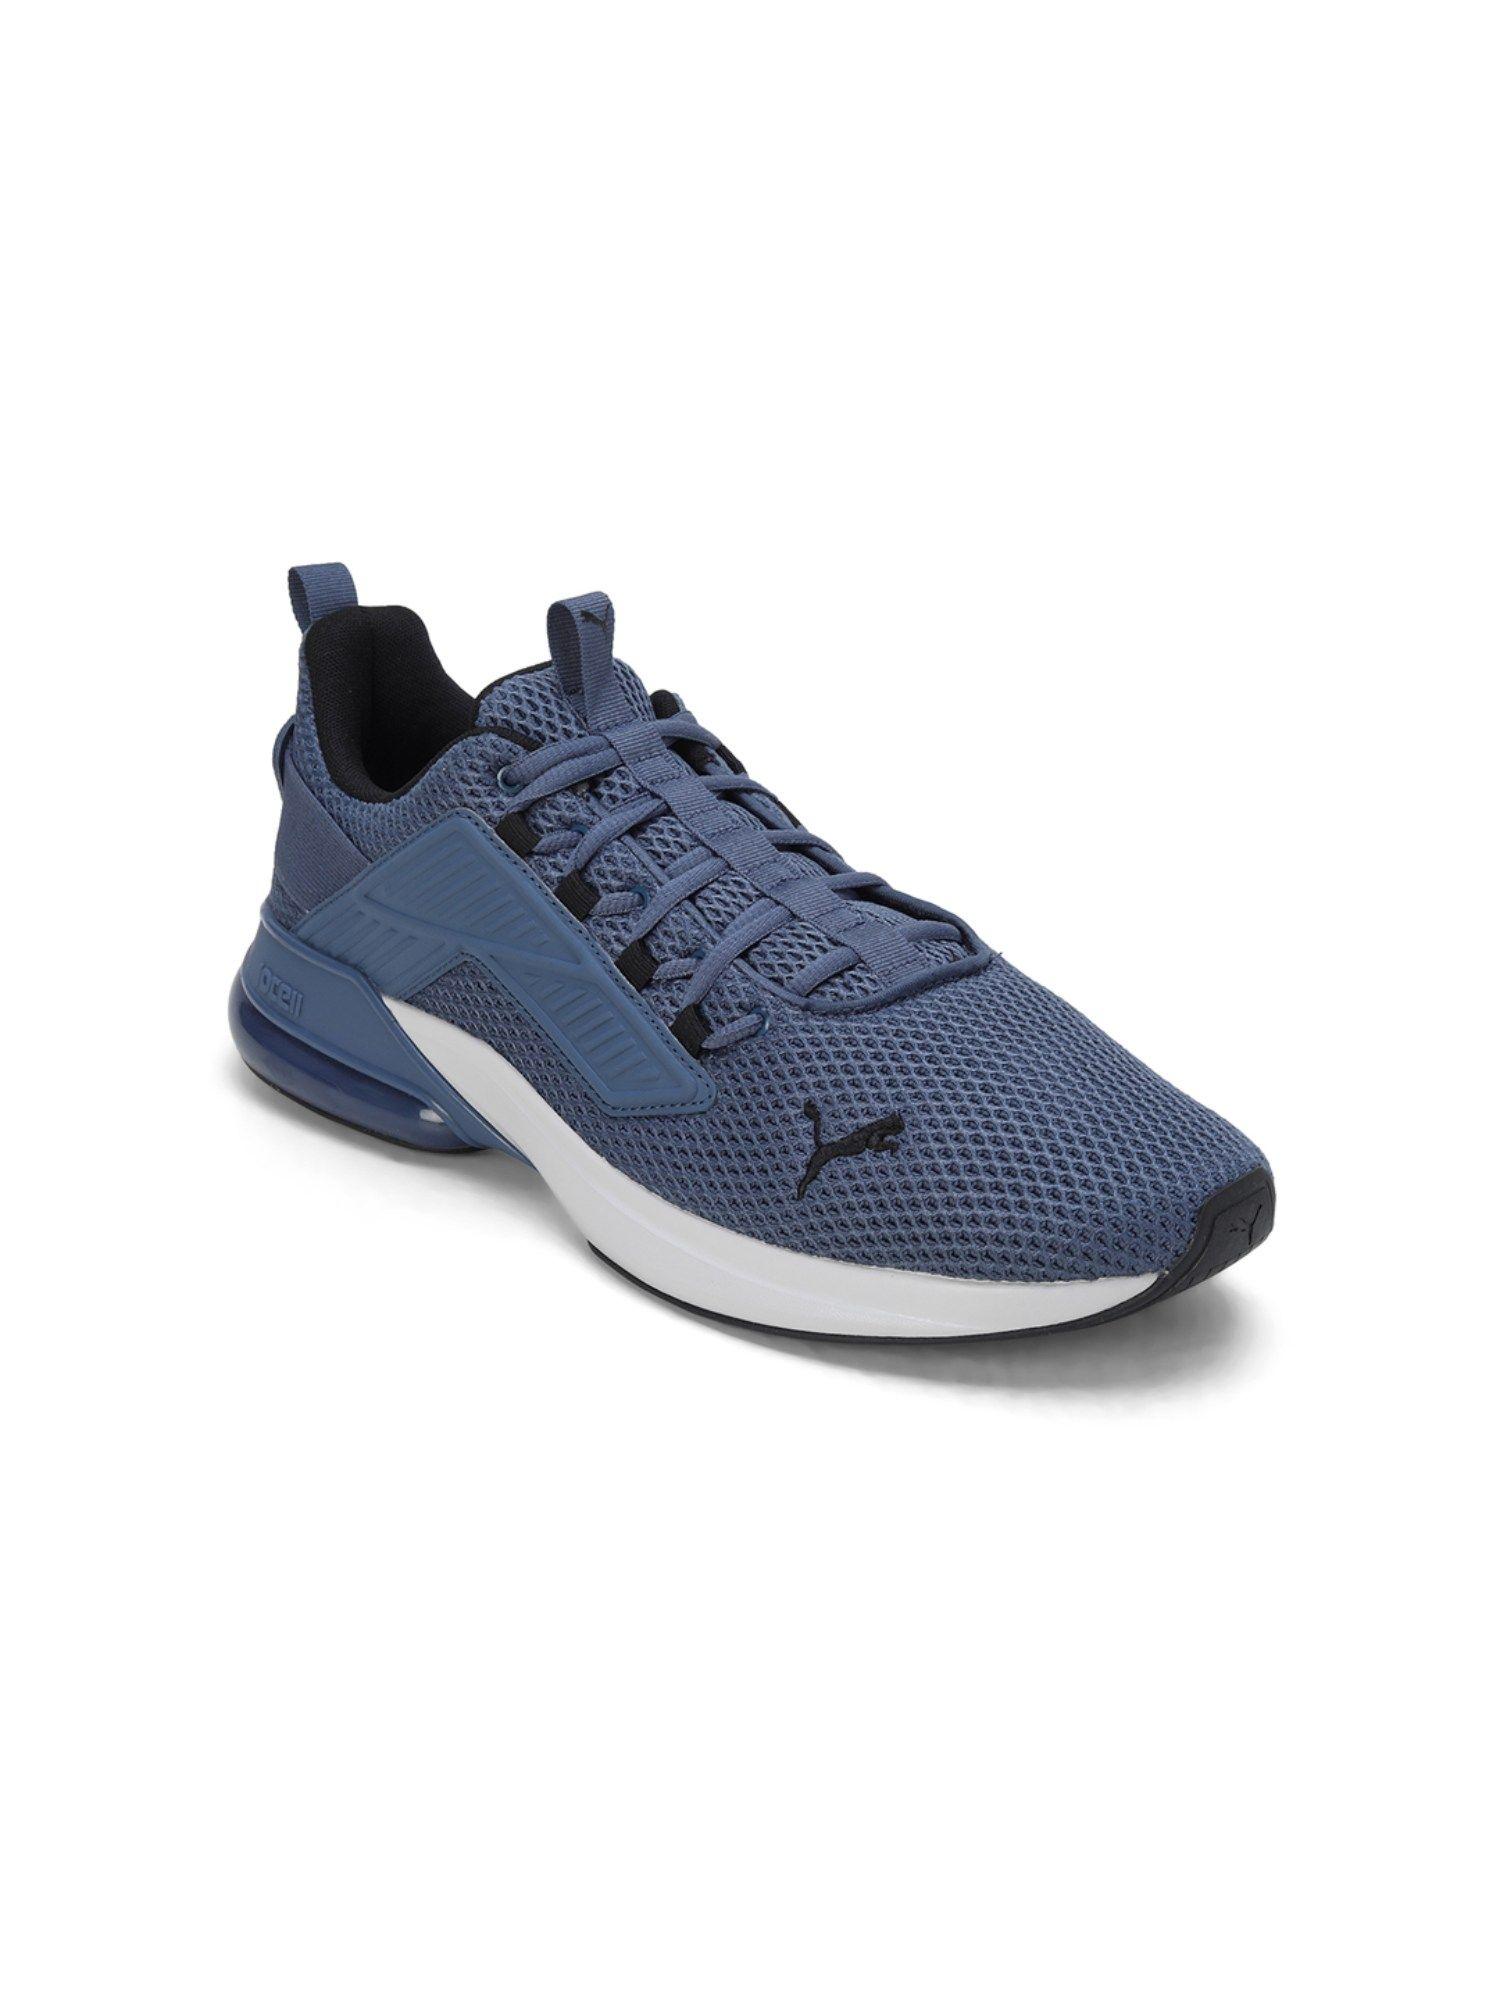 cell-rapid-unisex-blue-running-shoes